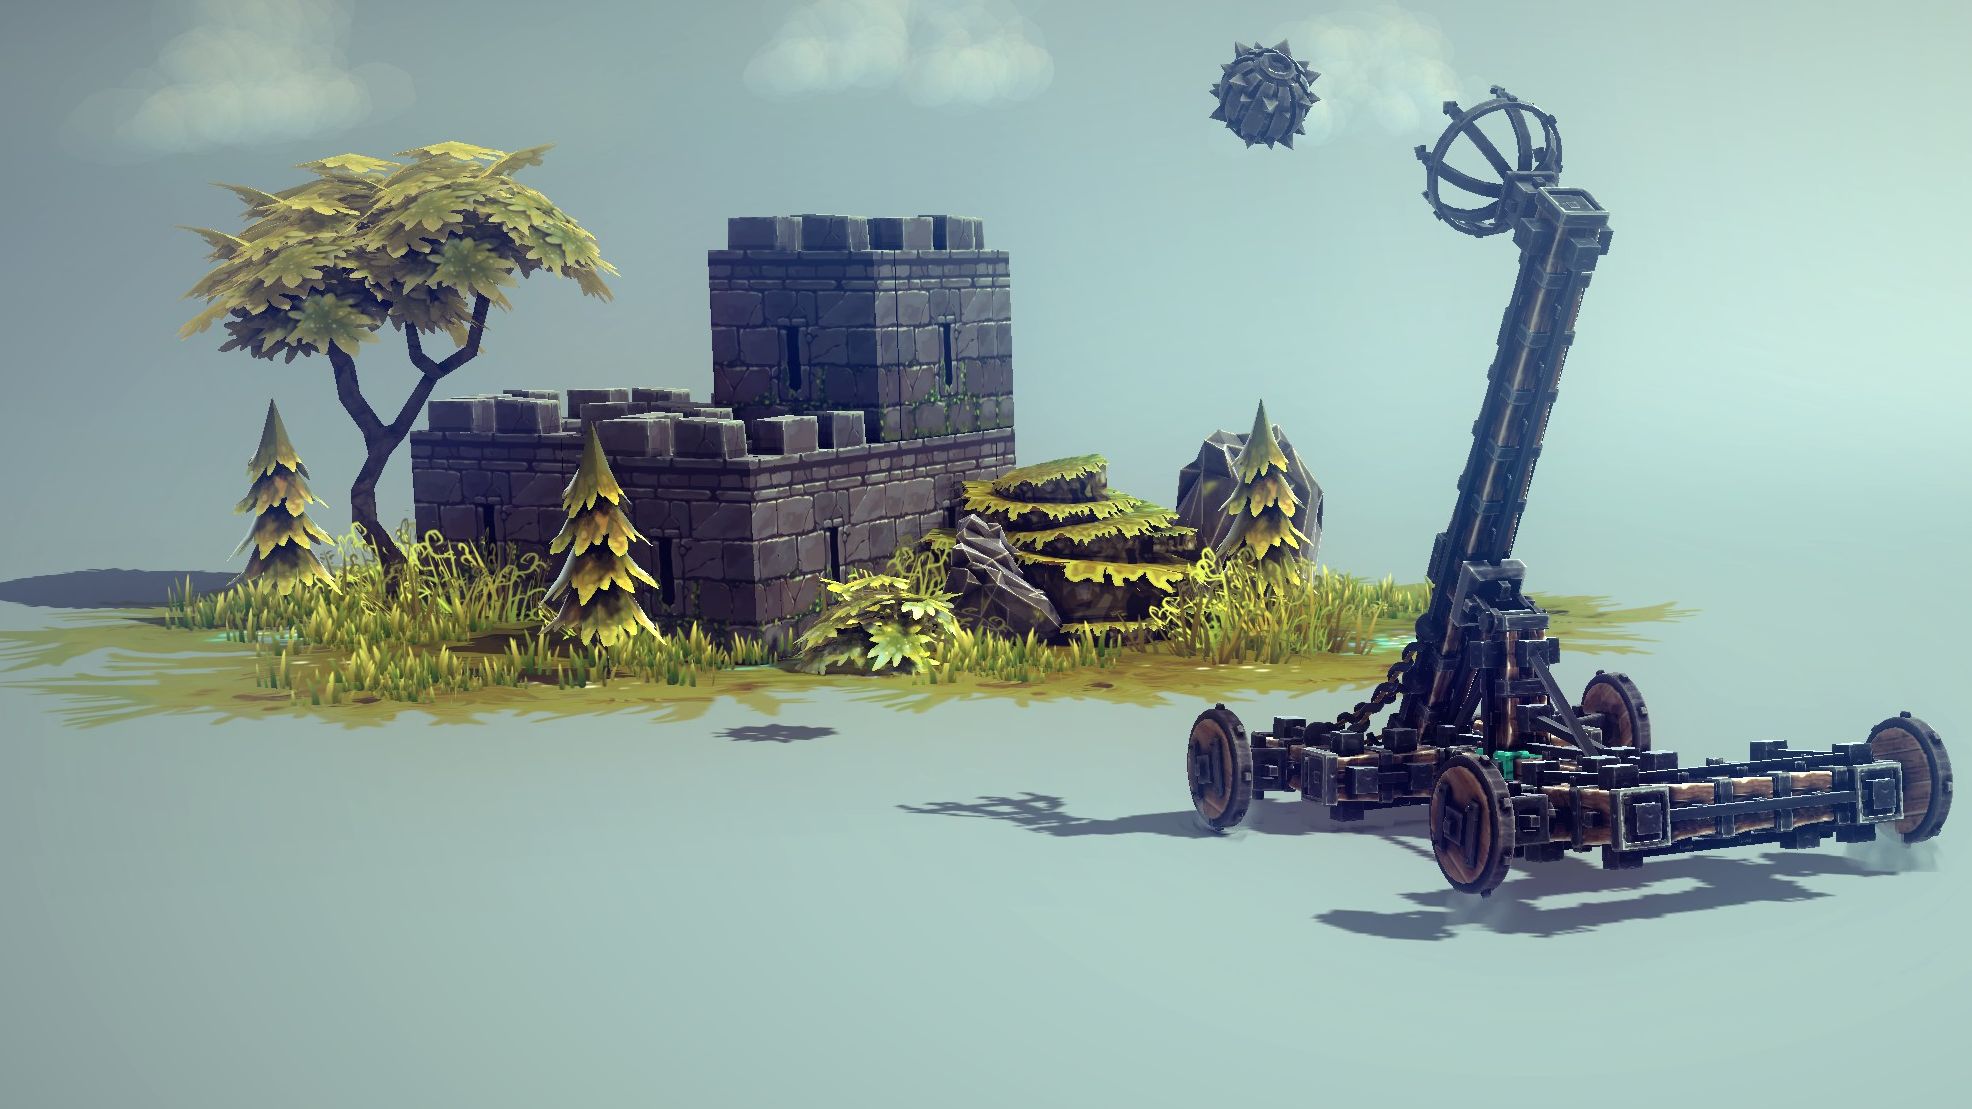 Besiege PC Download free full game for windows